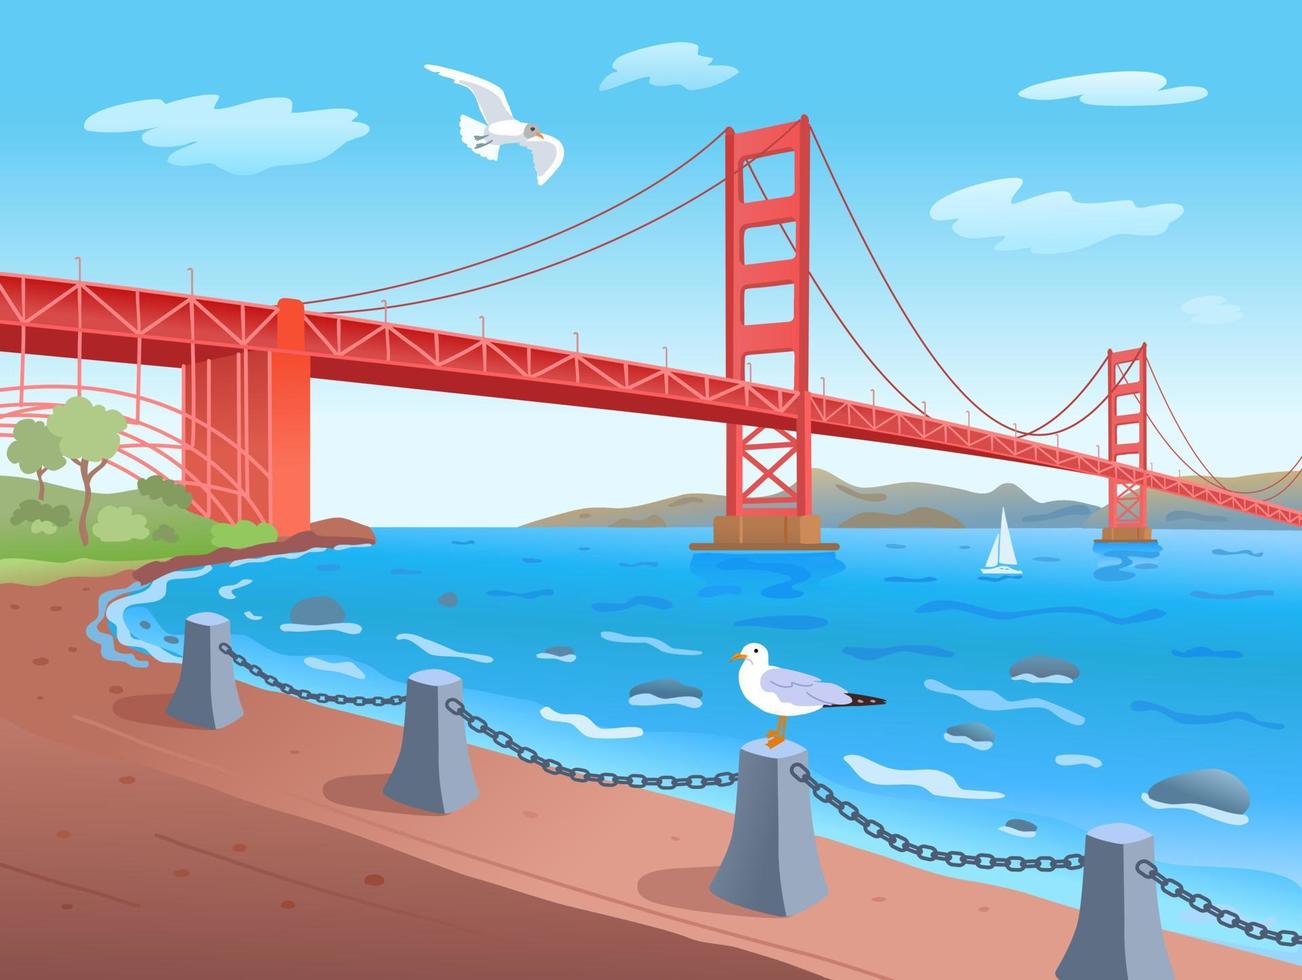 Bridge Golden Gate across the strait. One of the most recognizable bridges in the world. City of San Francisco. Vector flat illustration.